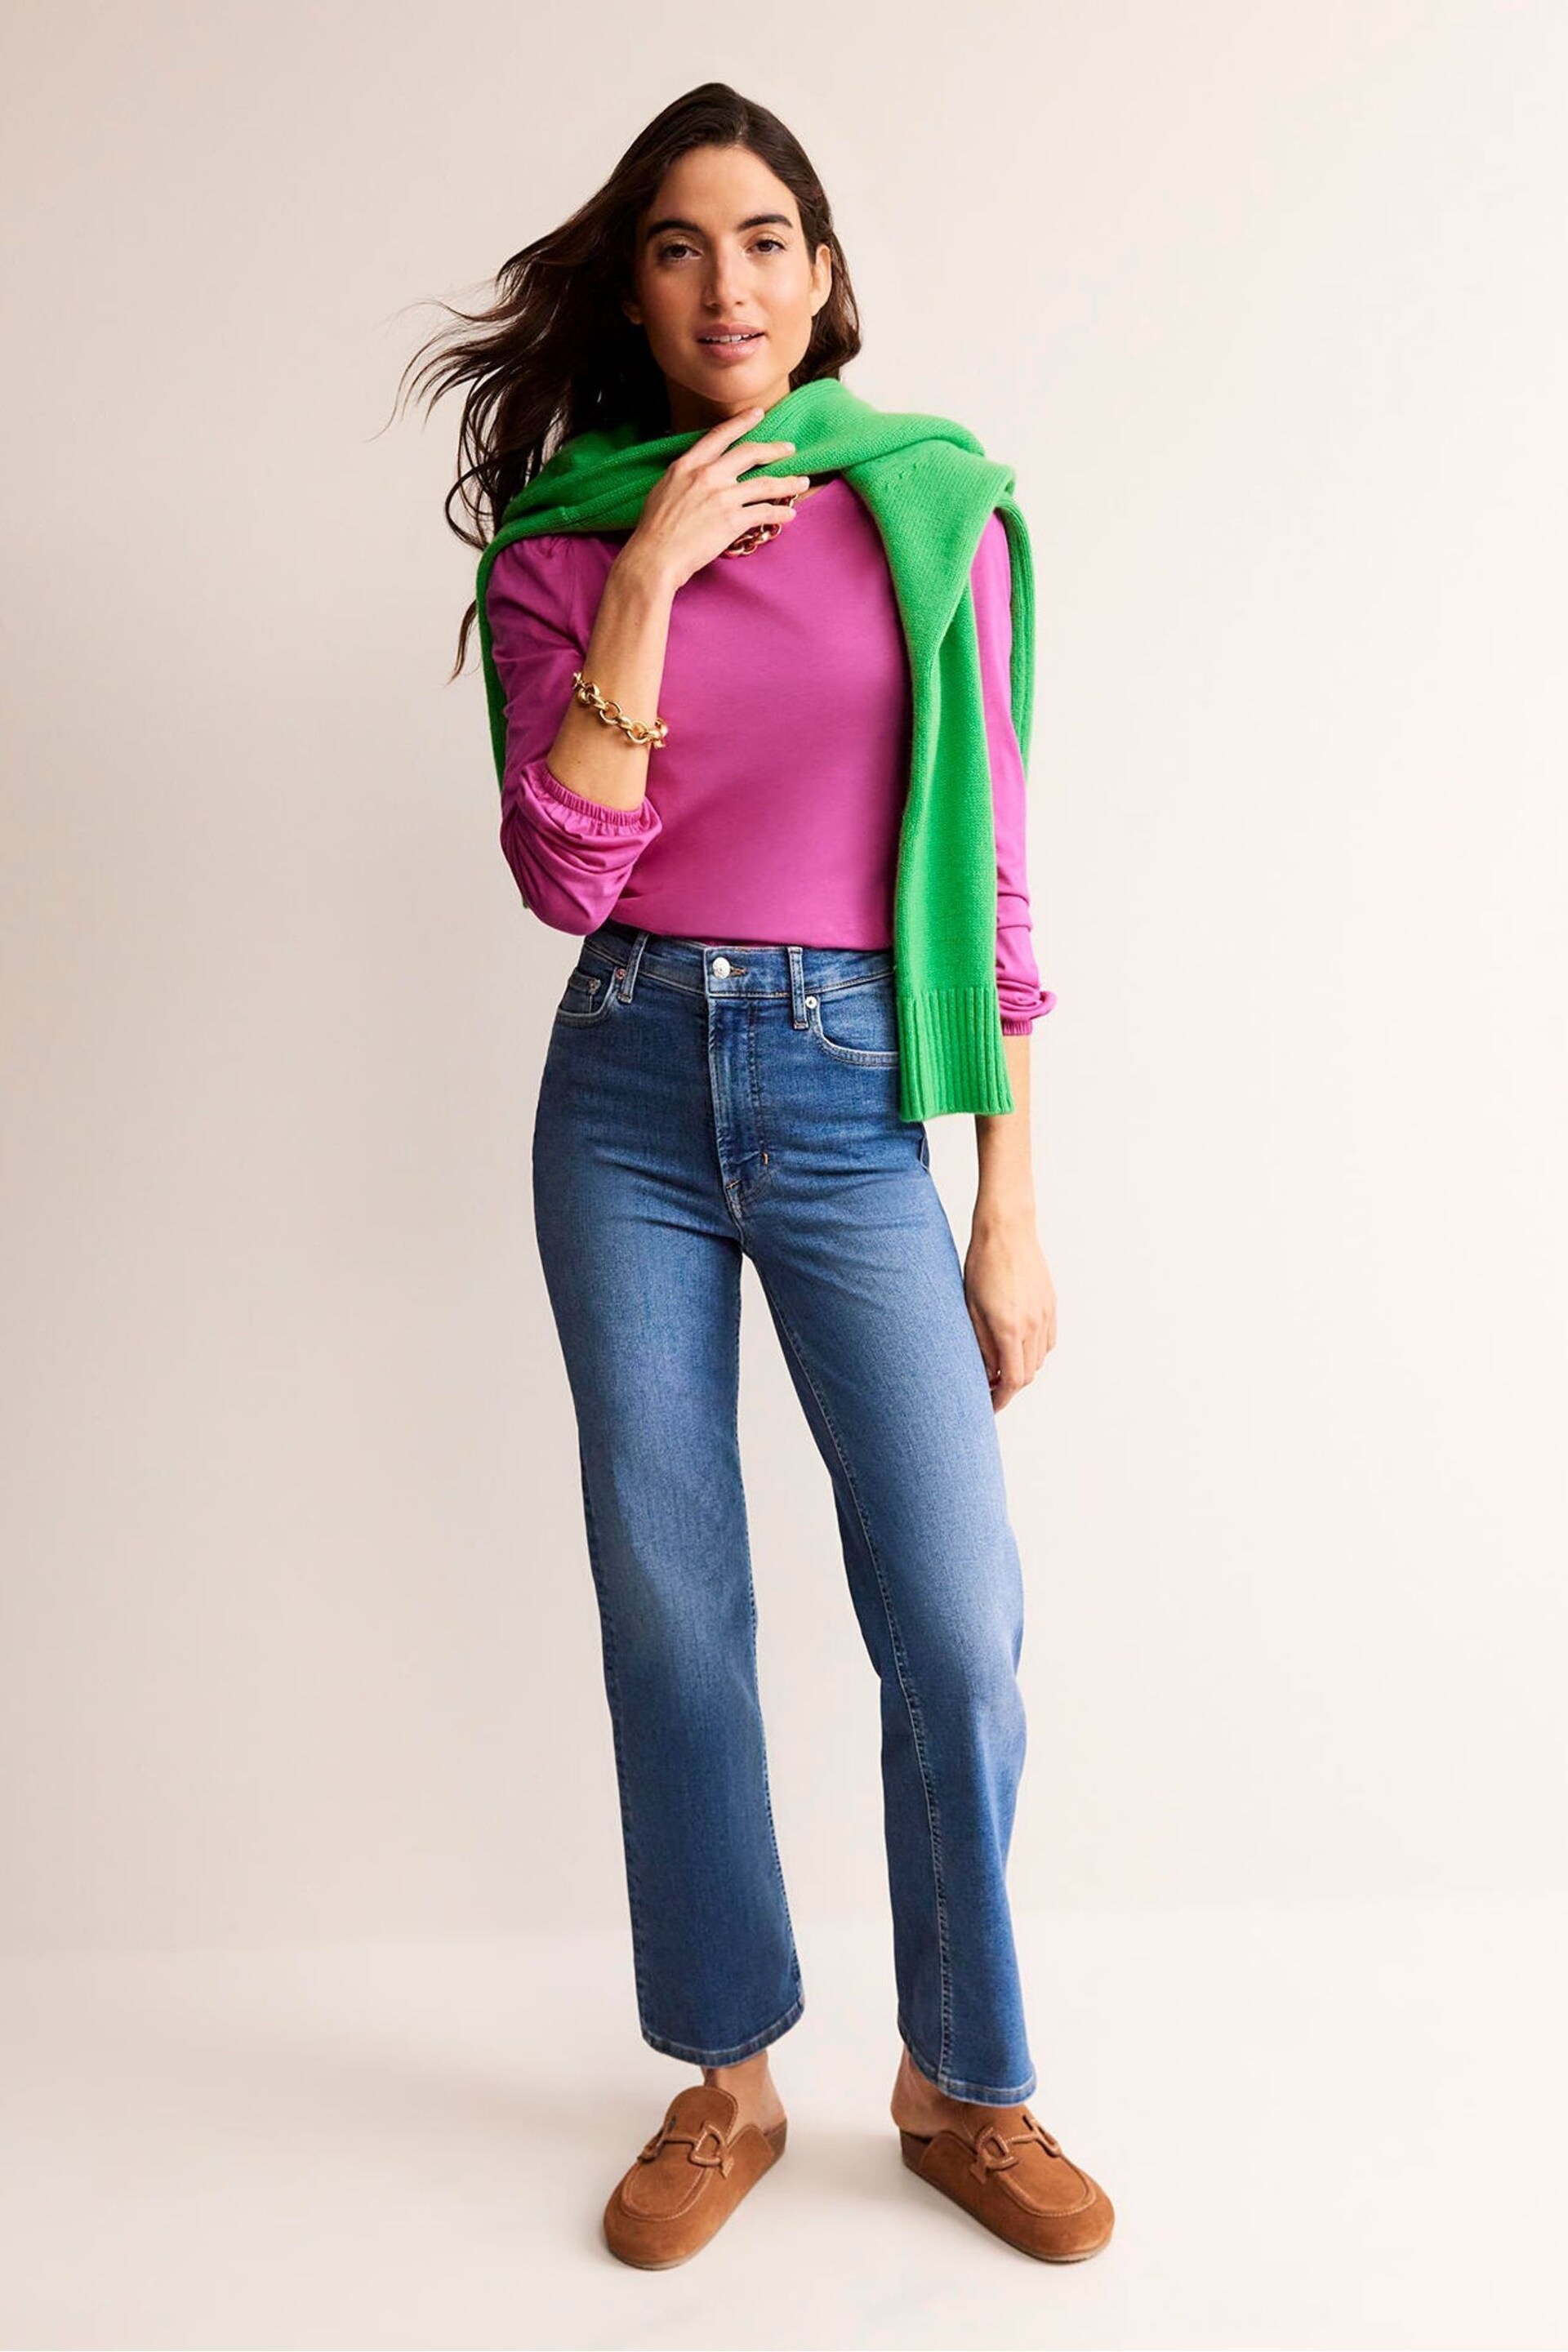 Boden Pink Supersoft Long Sleeve Top - Image 3 of 5